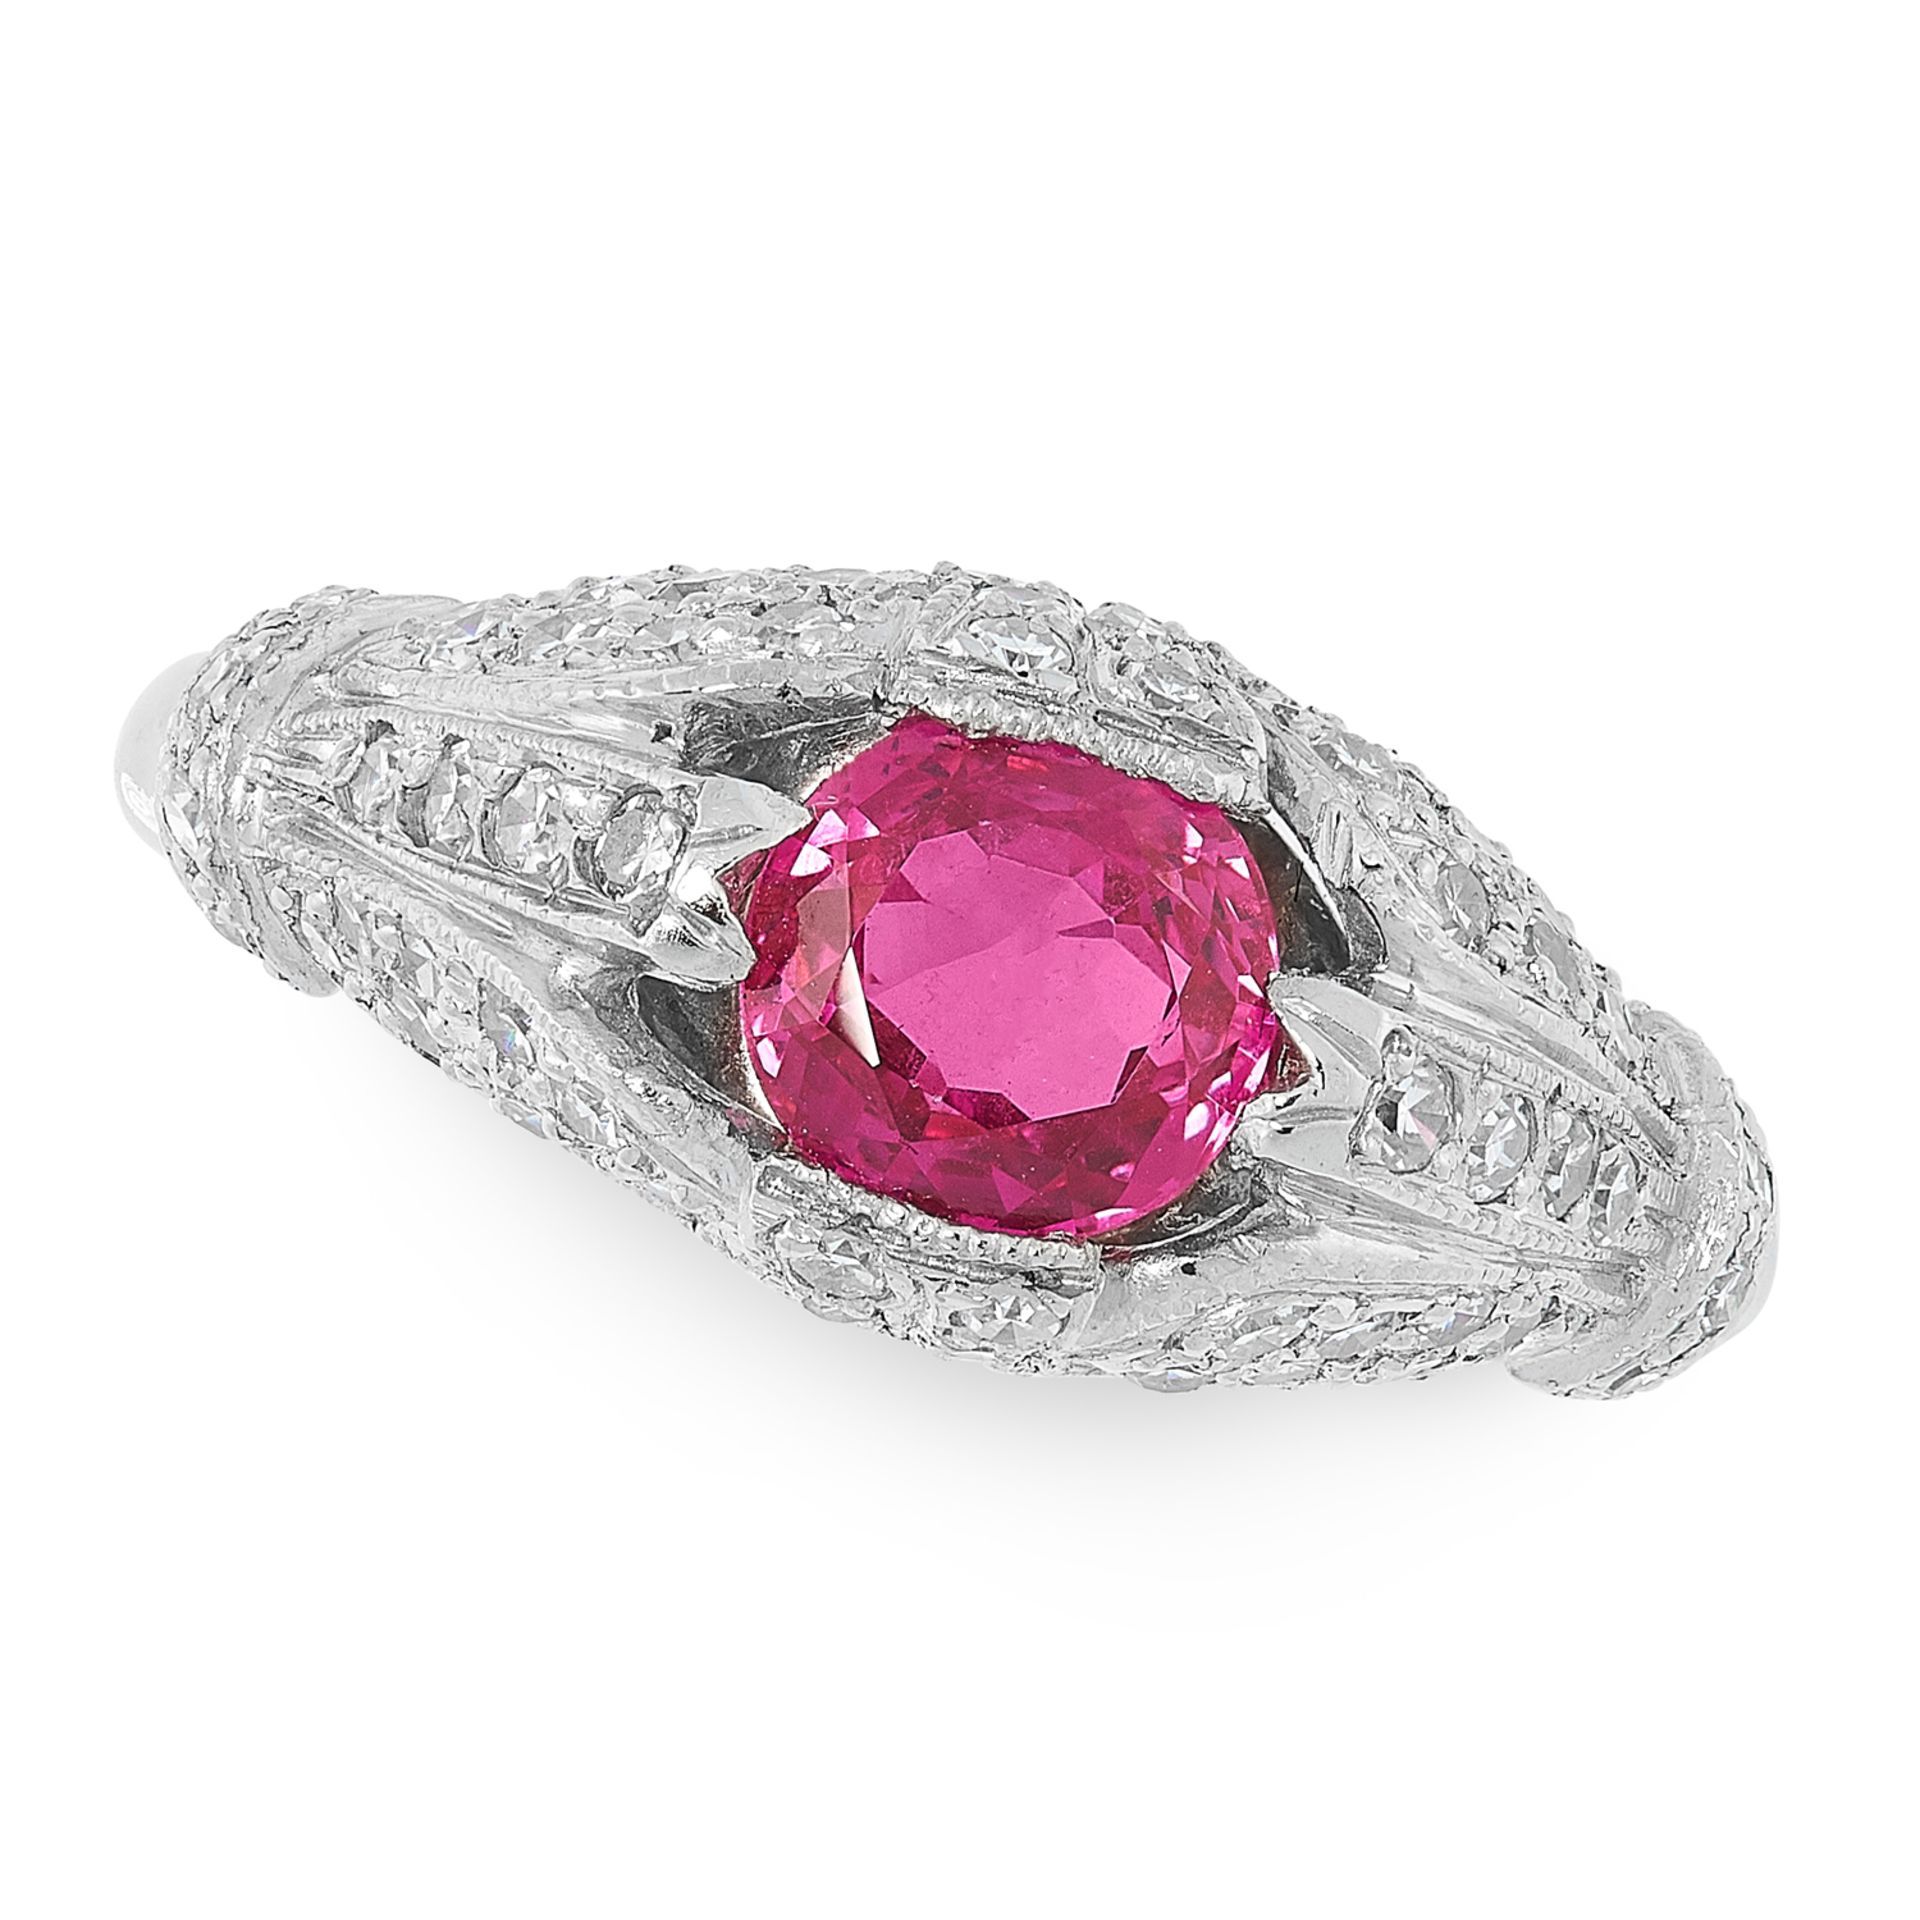 AN ART DECO BURMA NO HEAT RUBY AND DIAMOND RING, EARLY 20TH CENTURY in platinum, set with an oval